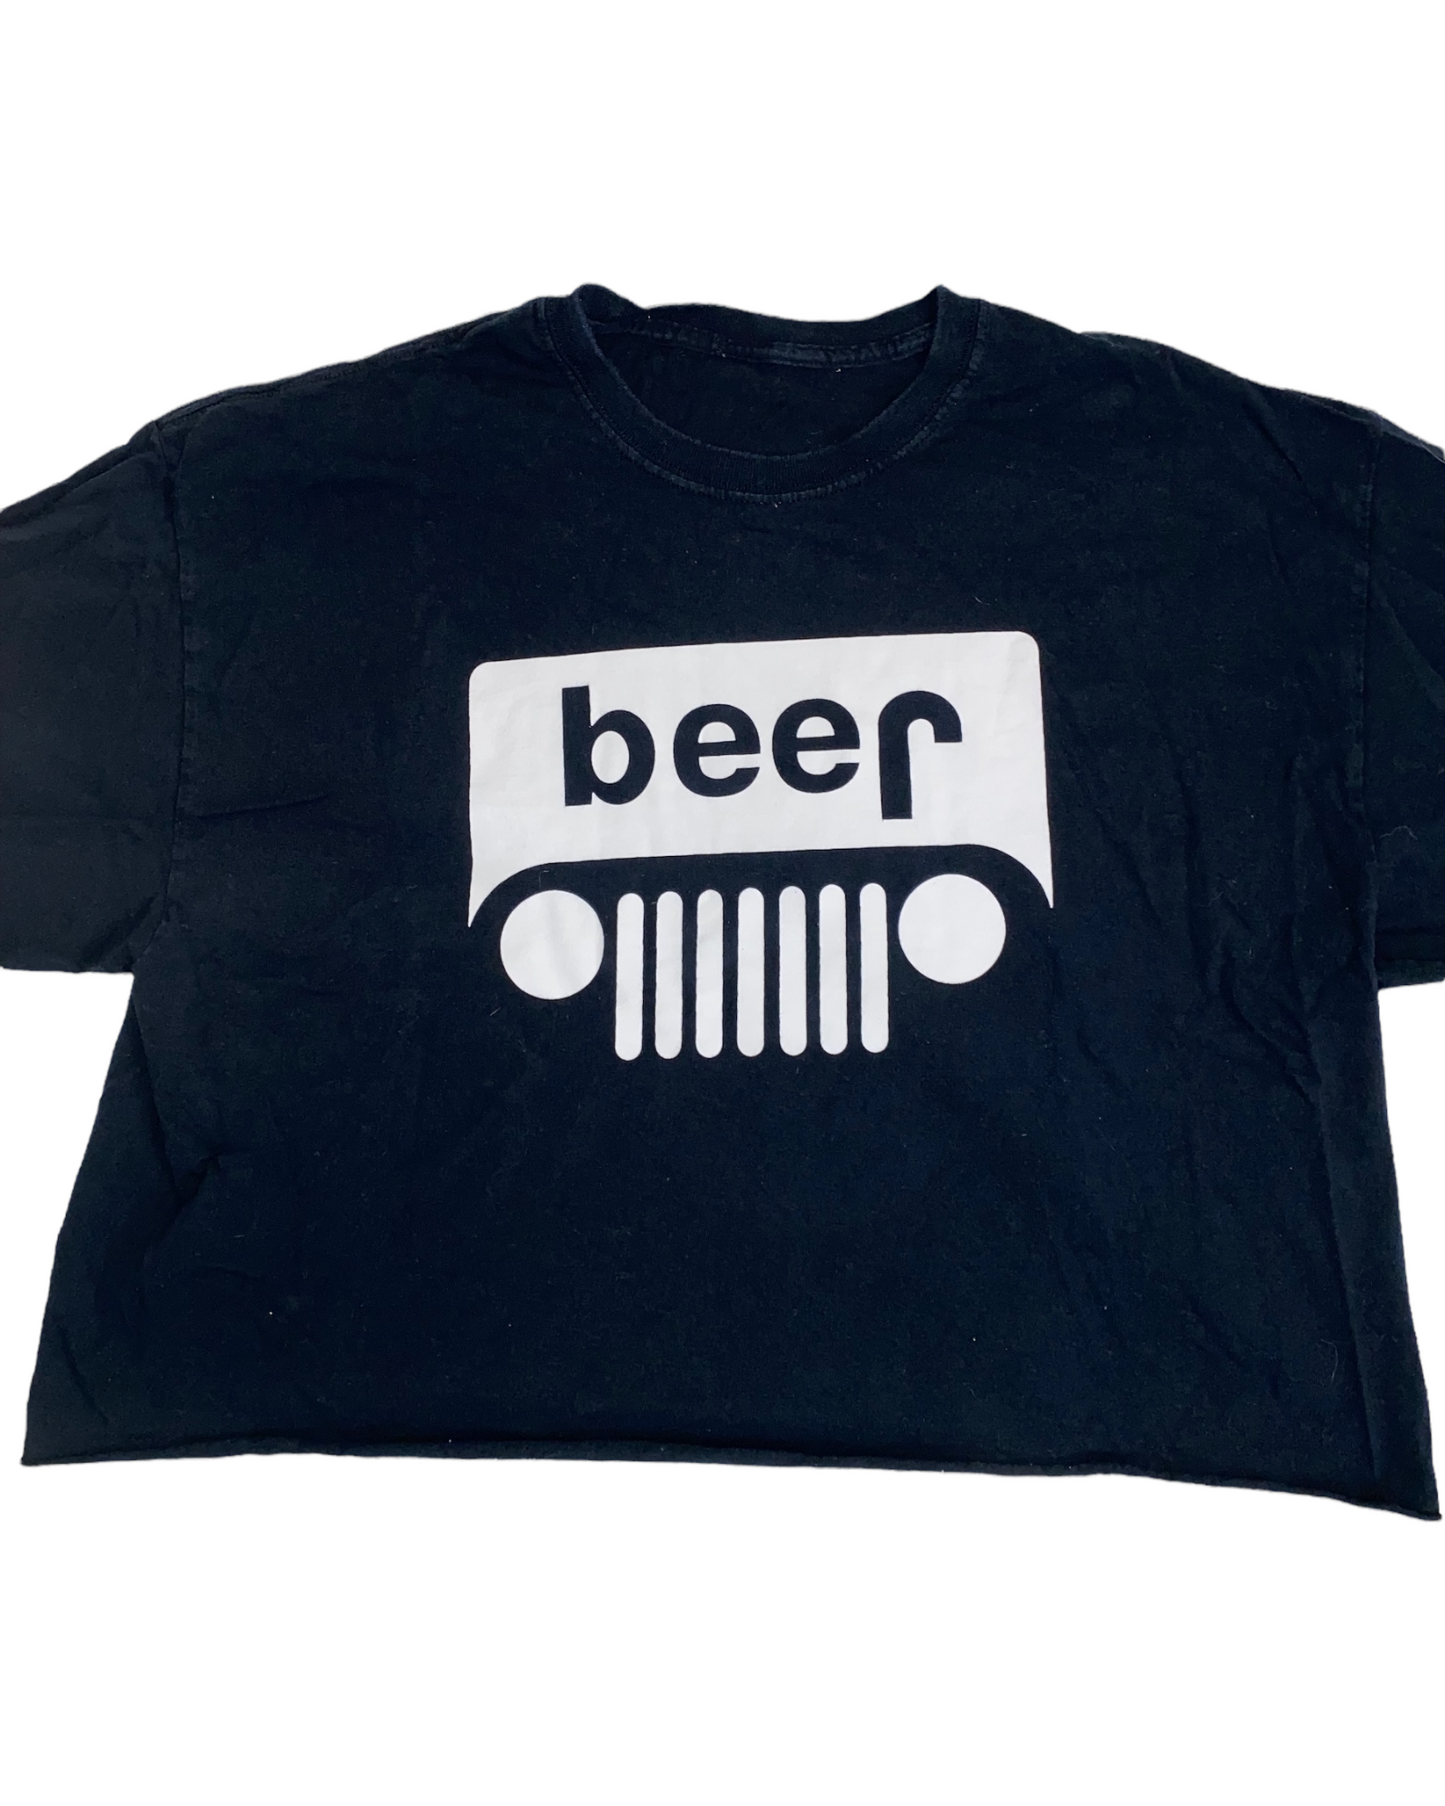 Jeep Beer T shirt